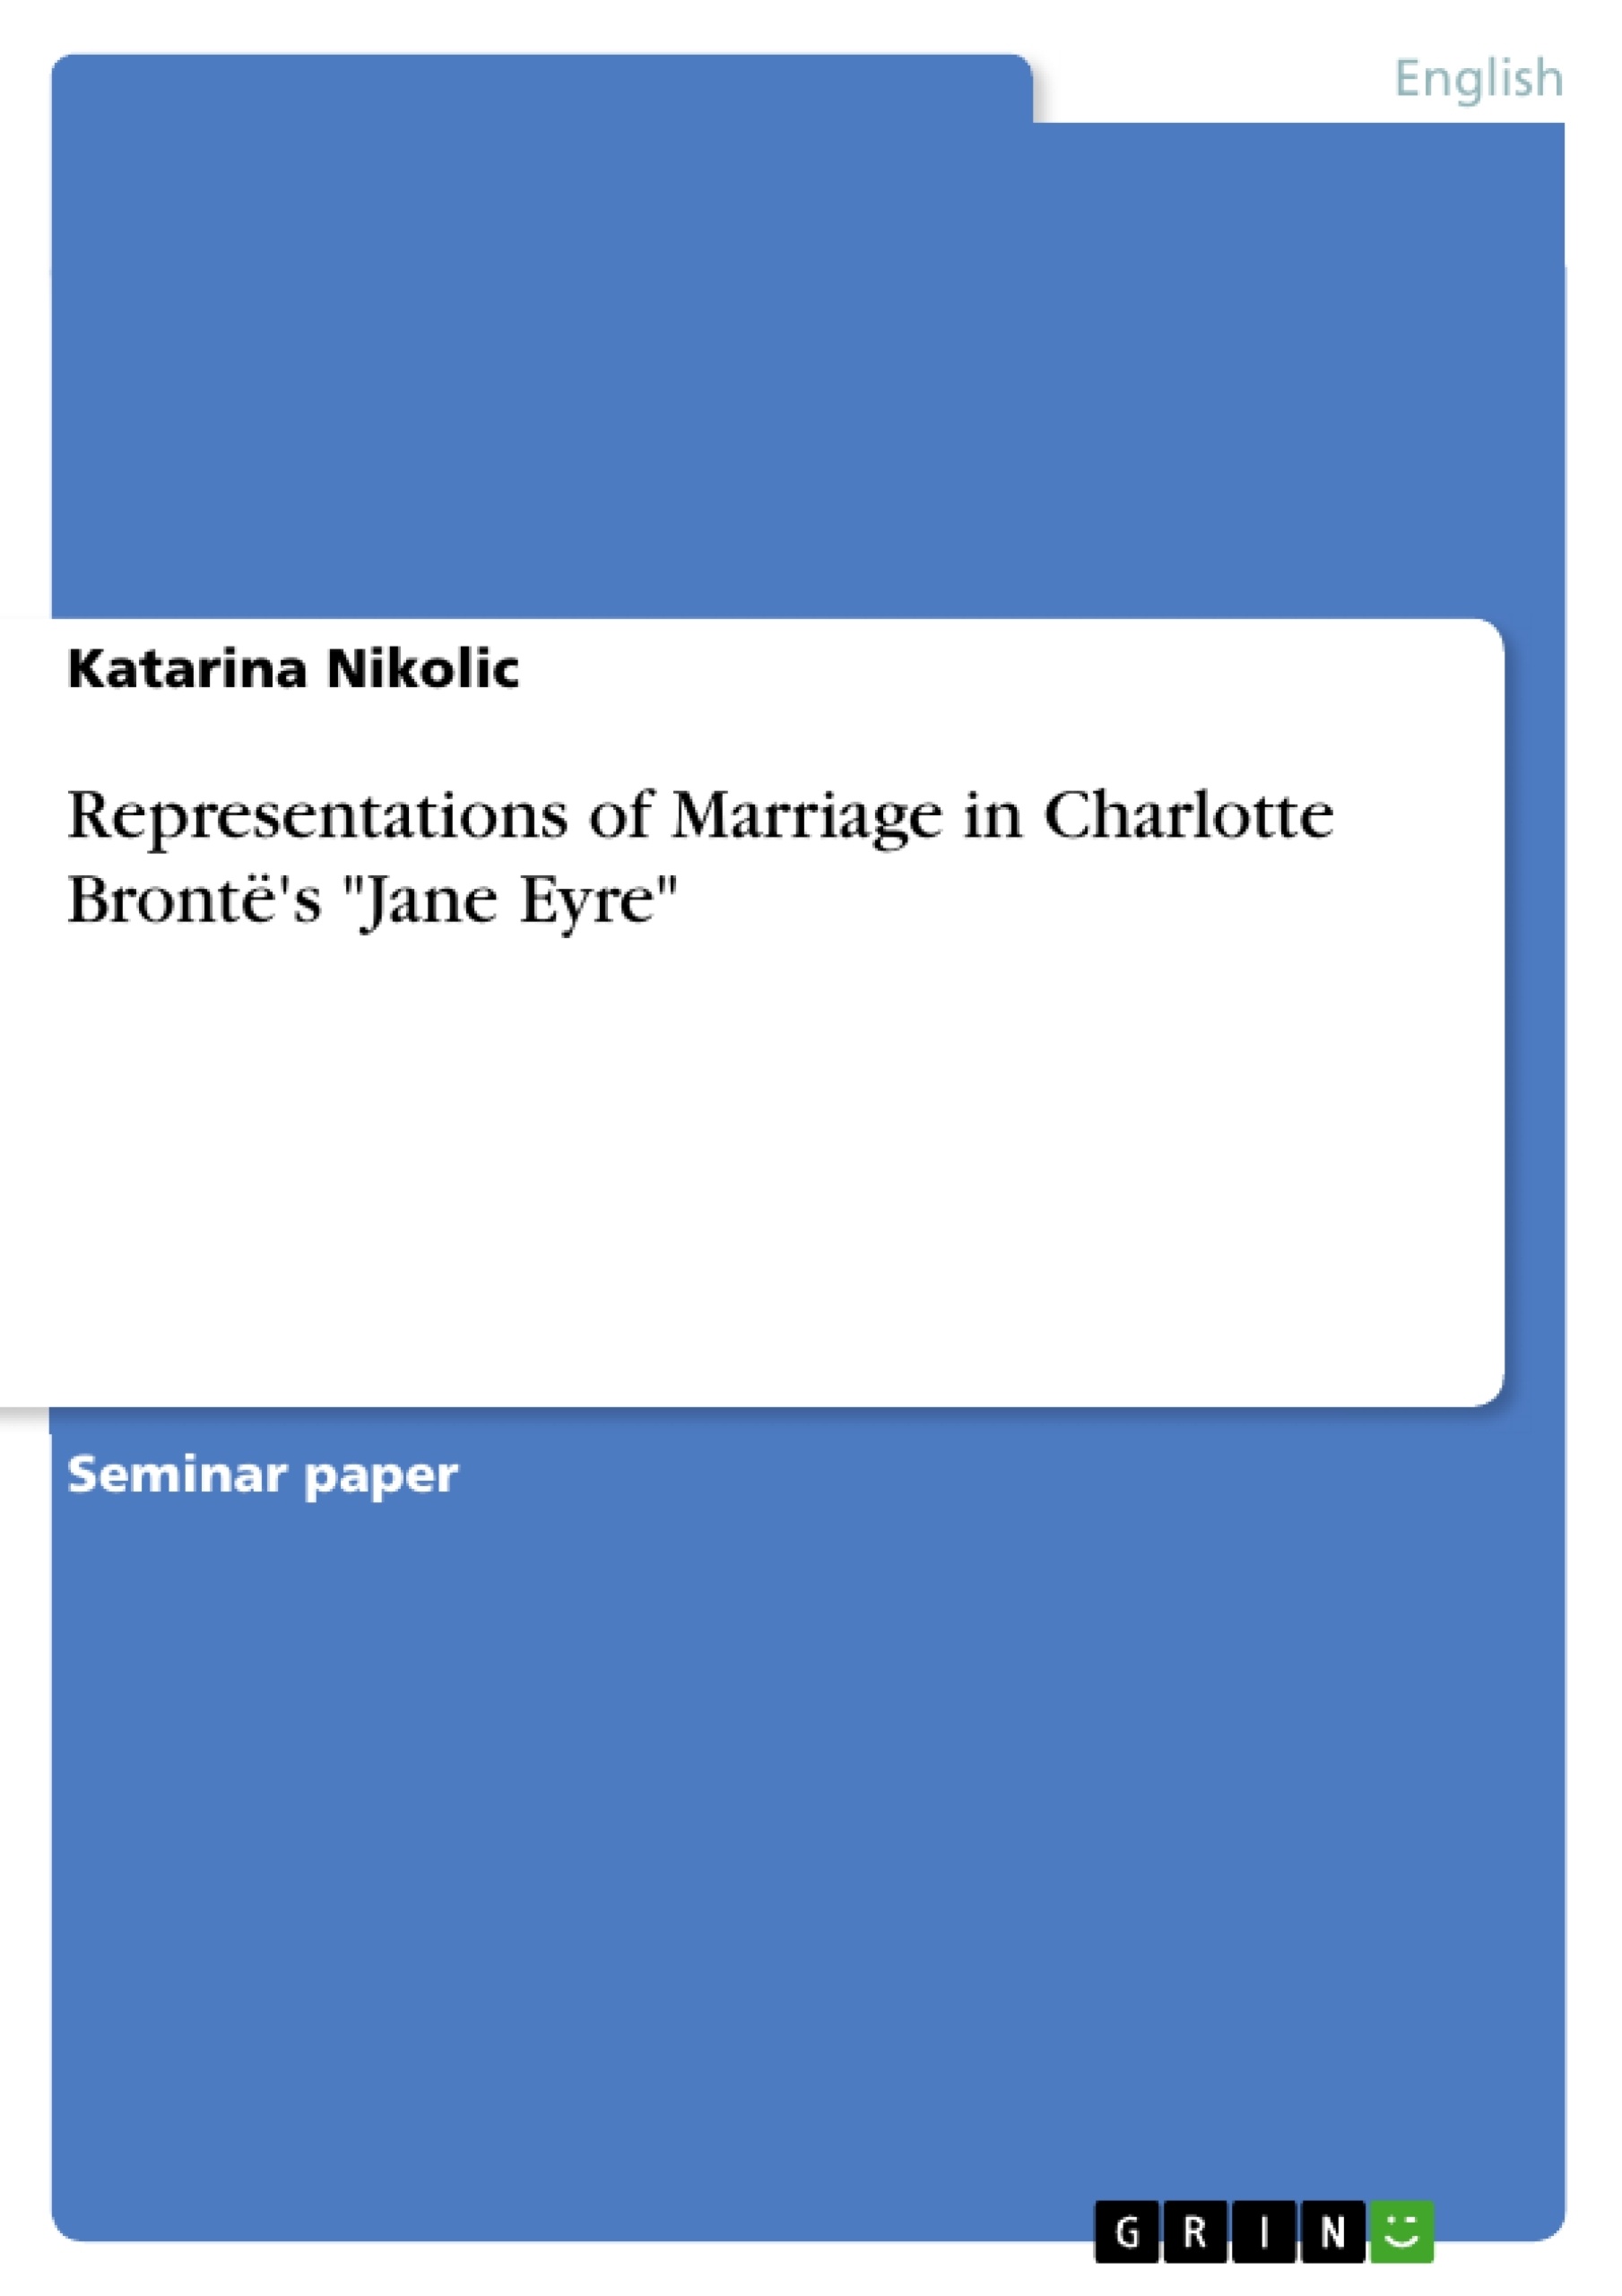 Title: Representations of Marriage in Charlotte Brontë's "Jane Eyre"